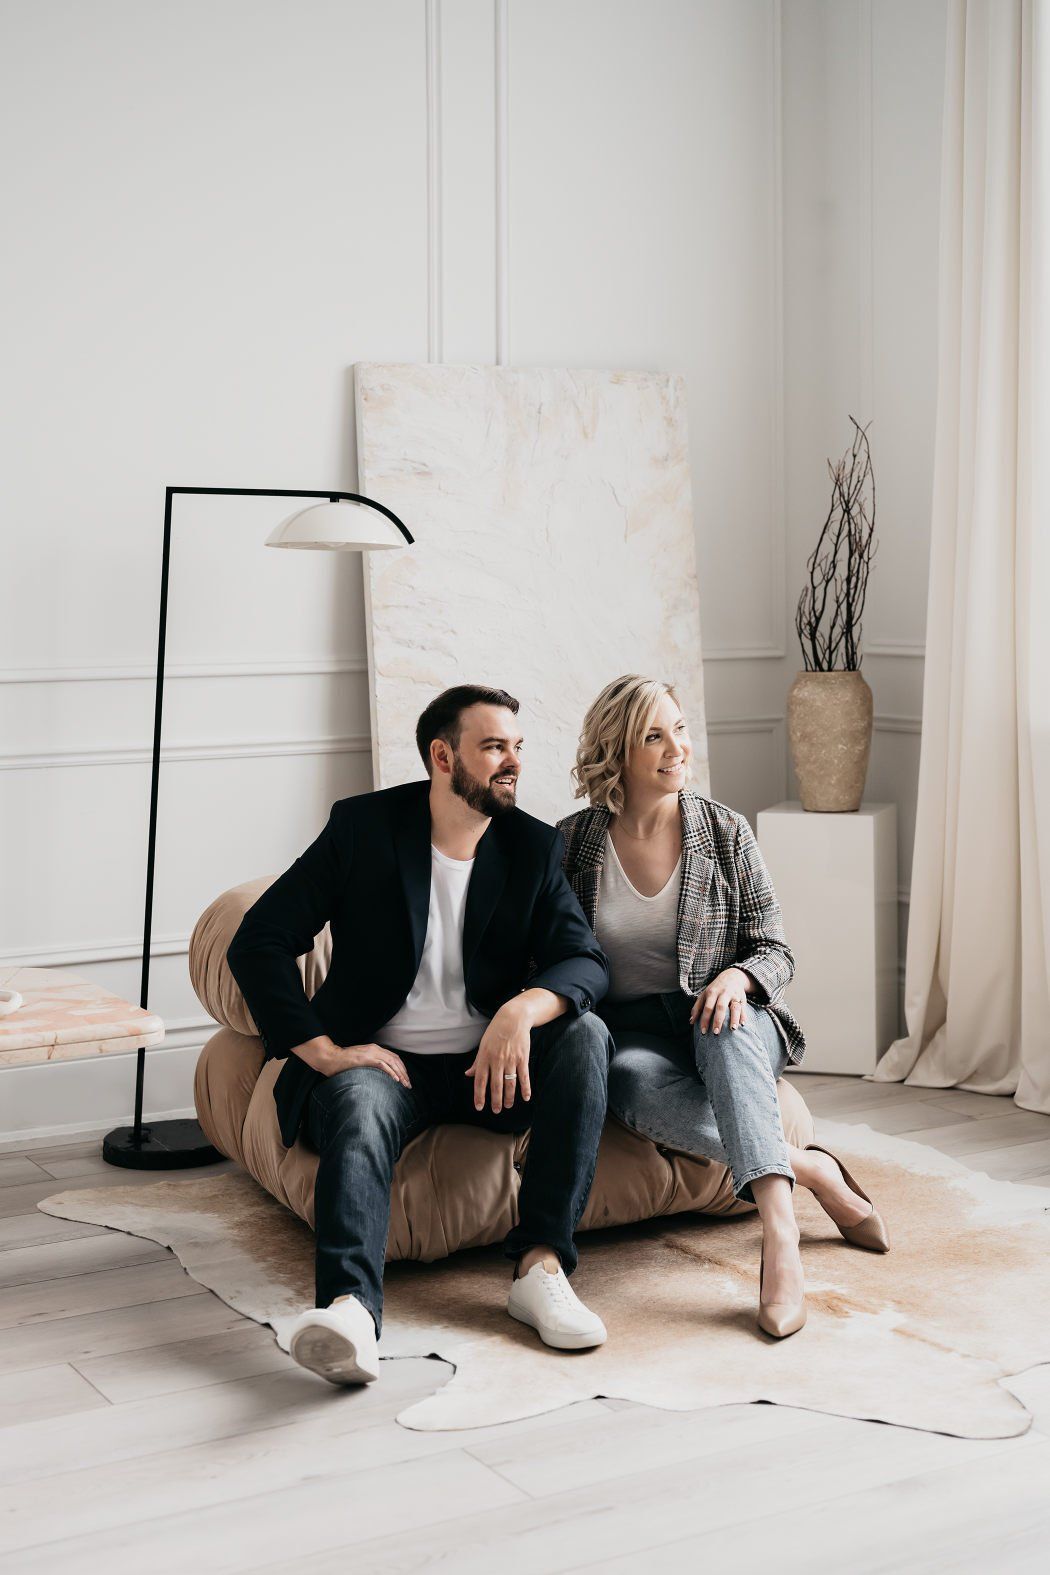 A couple wearing casual outfits as they sit in the middle of a minimalist living room set up